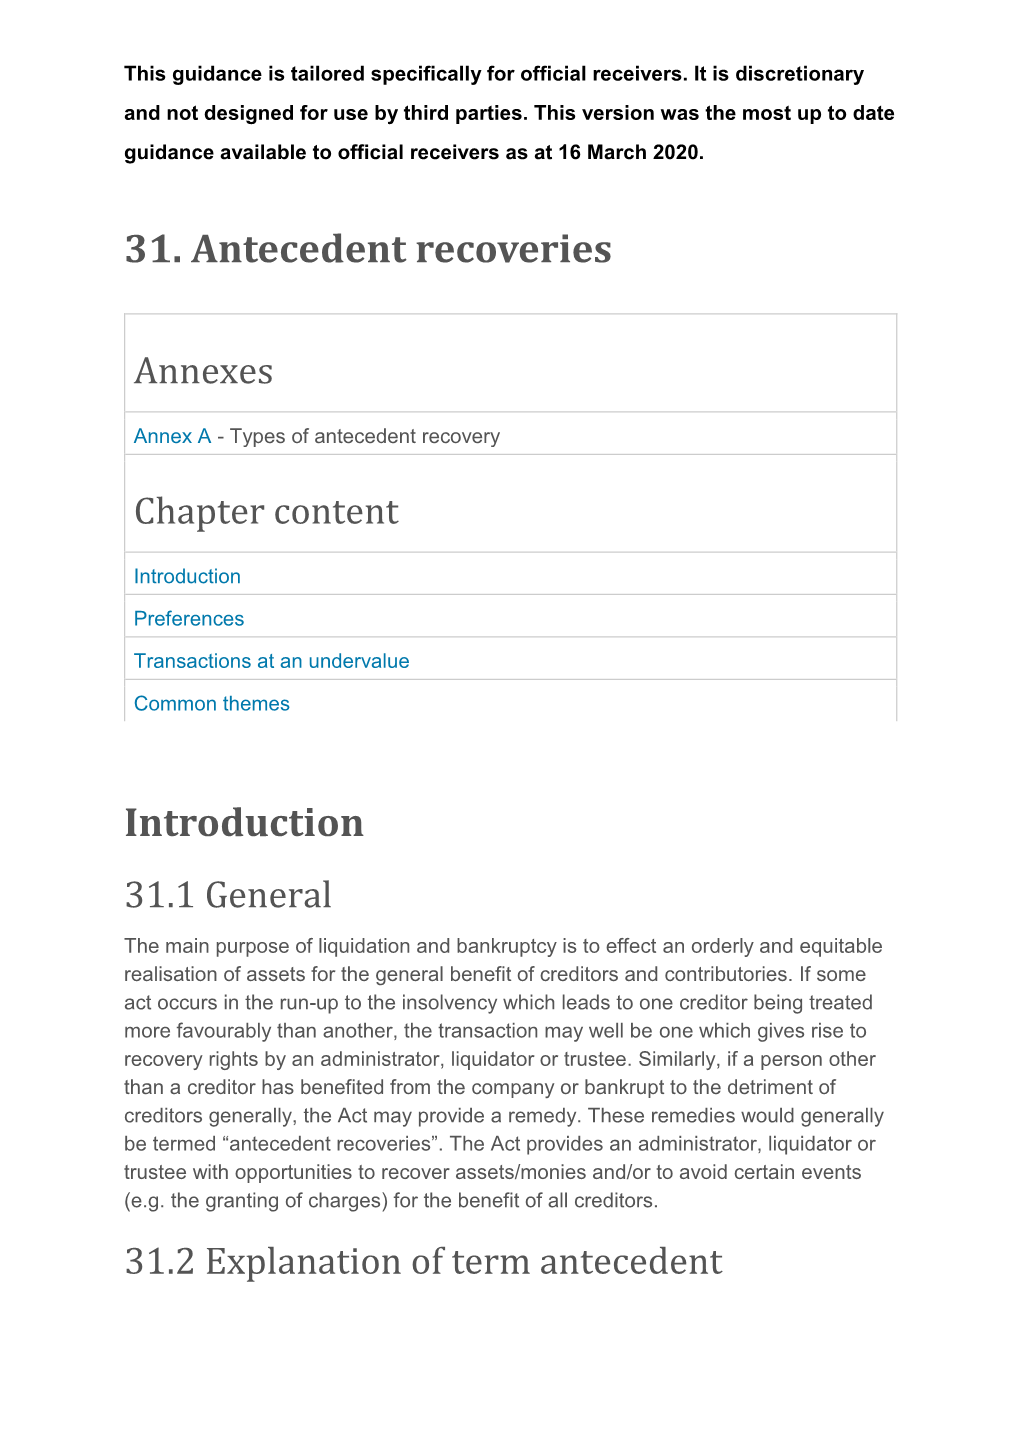 31. Antecedent Recoveries Introduction